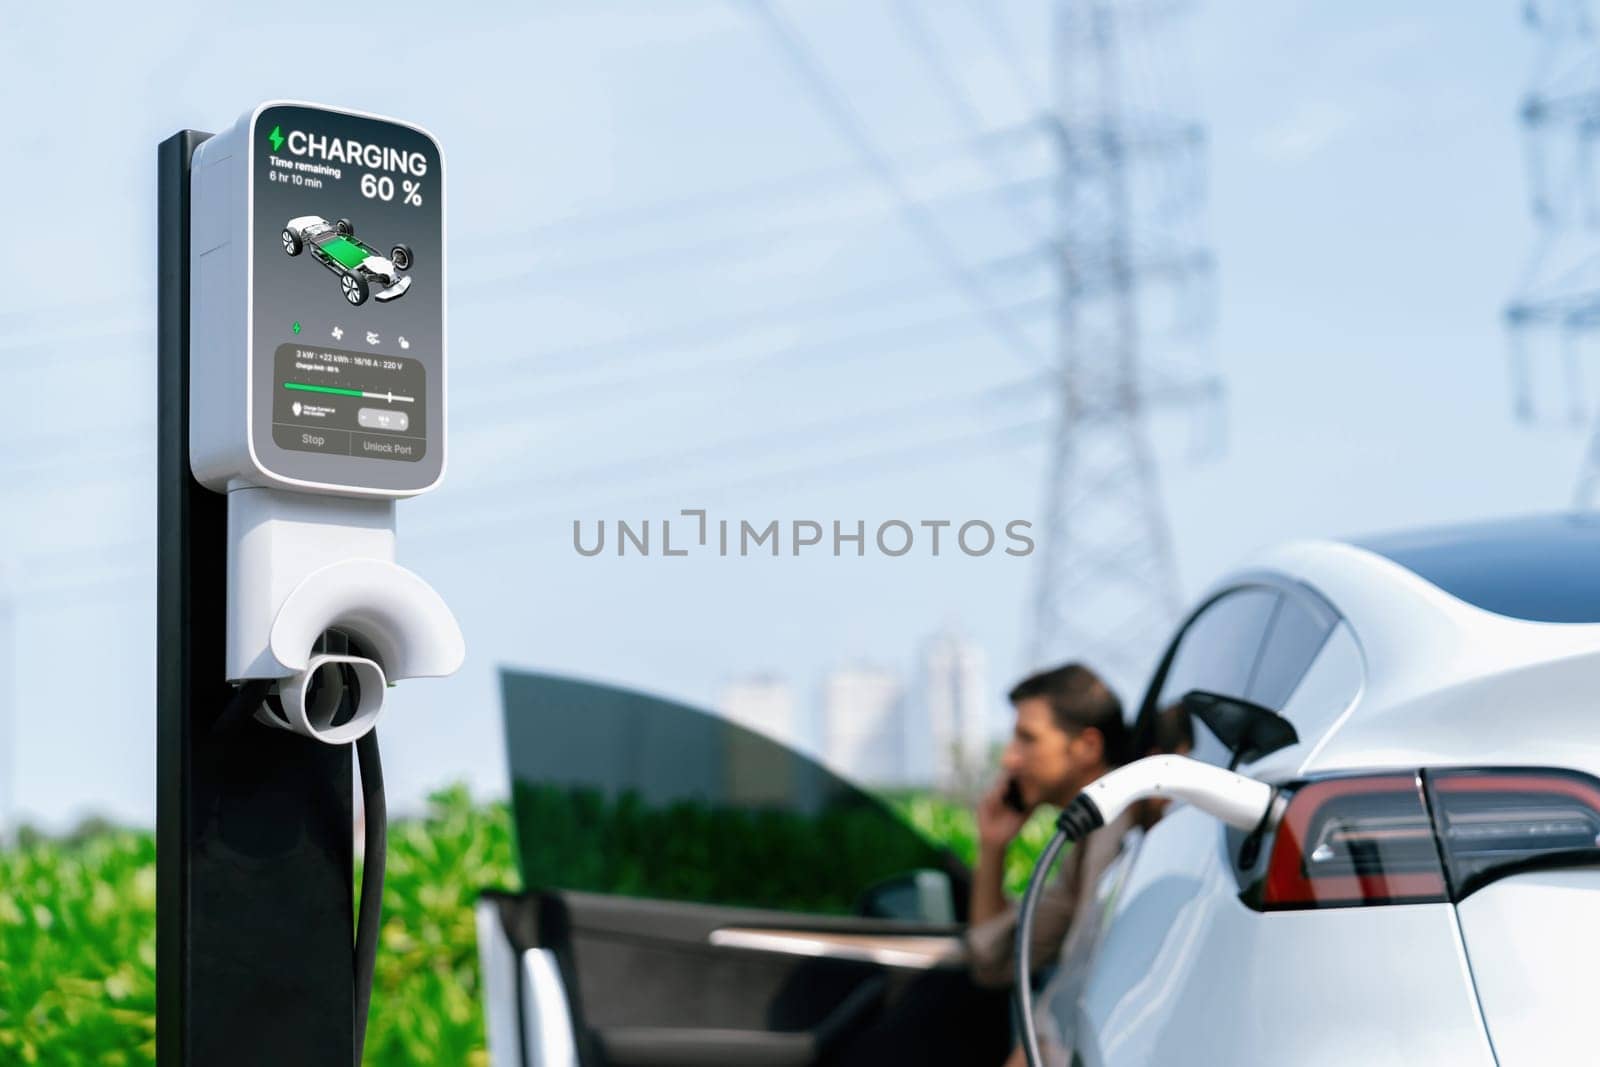 Man talking on the phone while recharge EV car battery at charging station connected to power grid tower electrical as electrical industry for eco friendly car utilization.Expedient